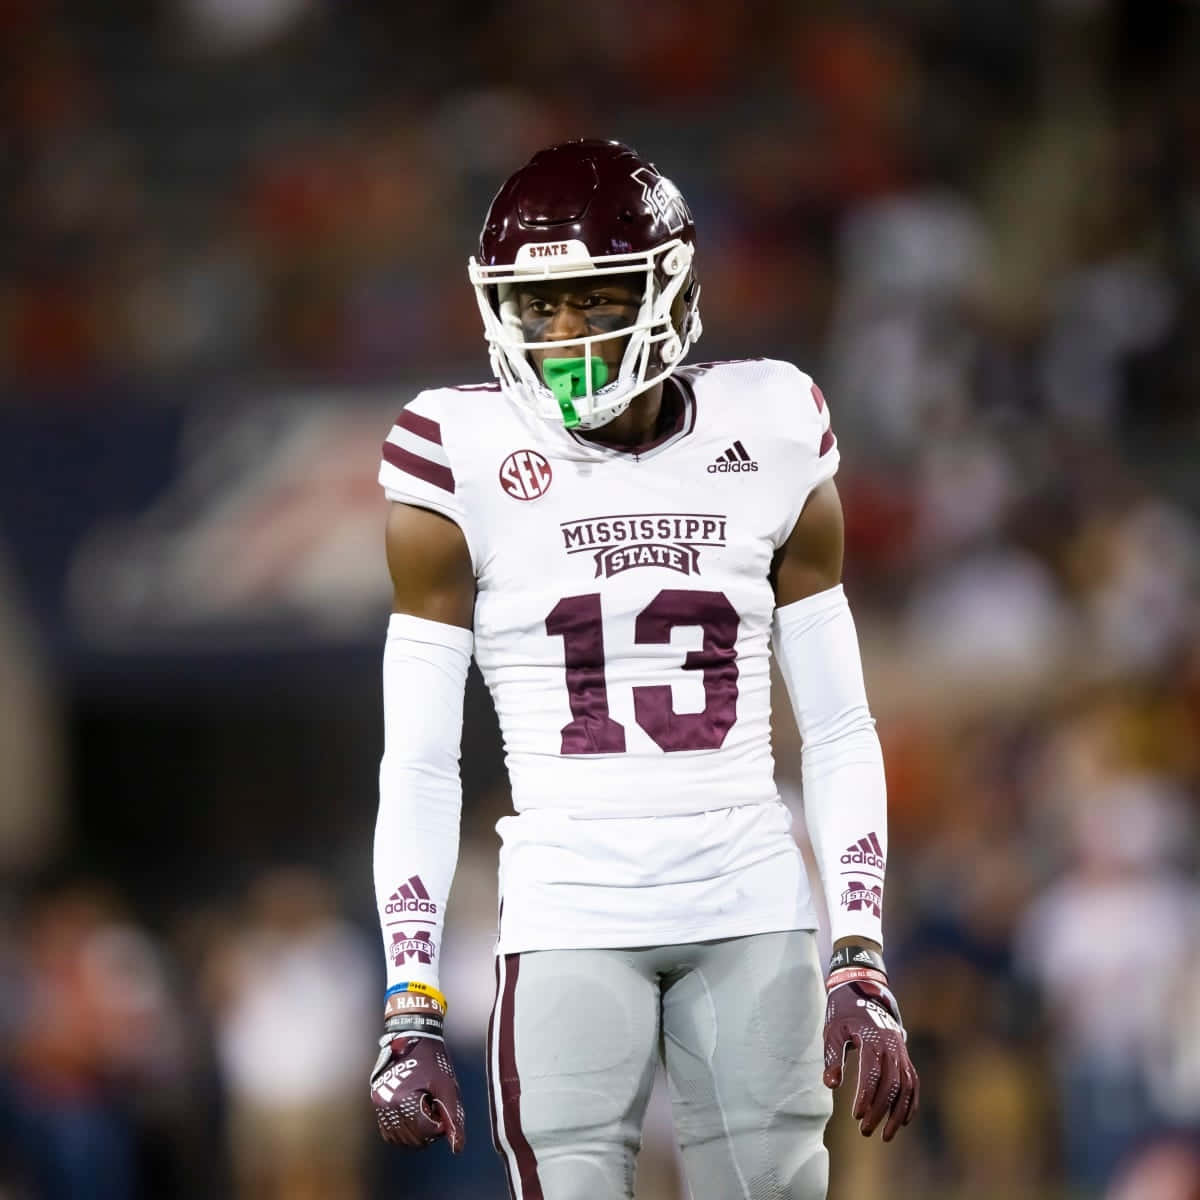 Mississippi State Football Player13 Wallpaper